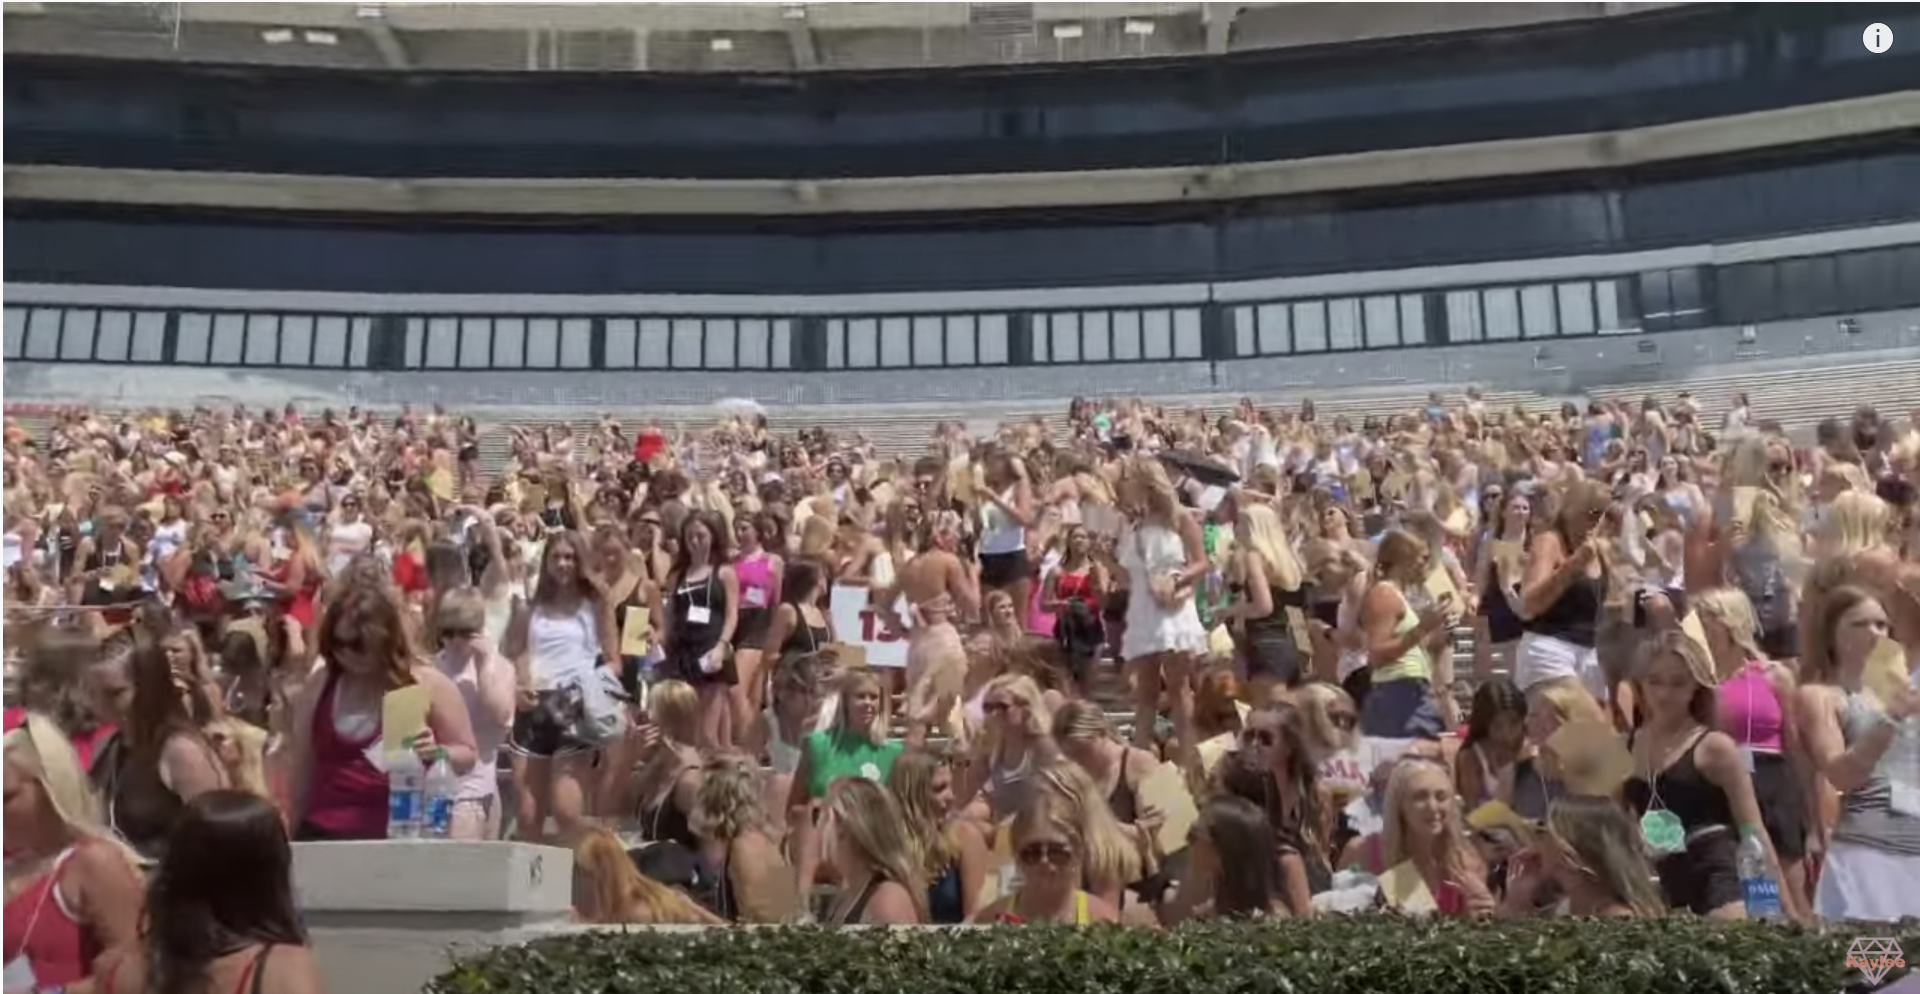 Young women waiting at a football stadium on Bid Day